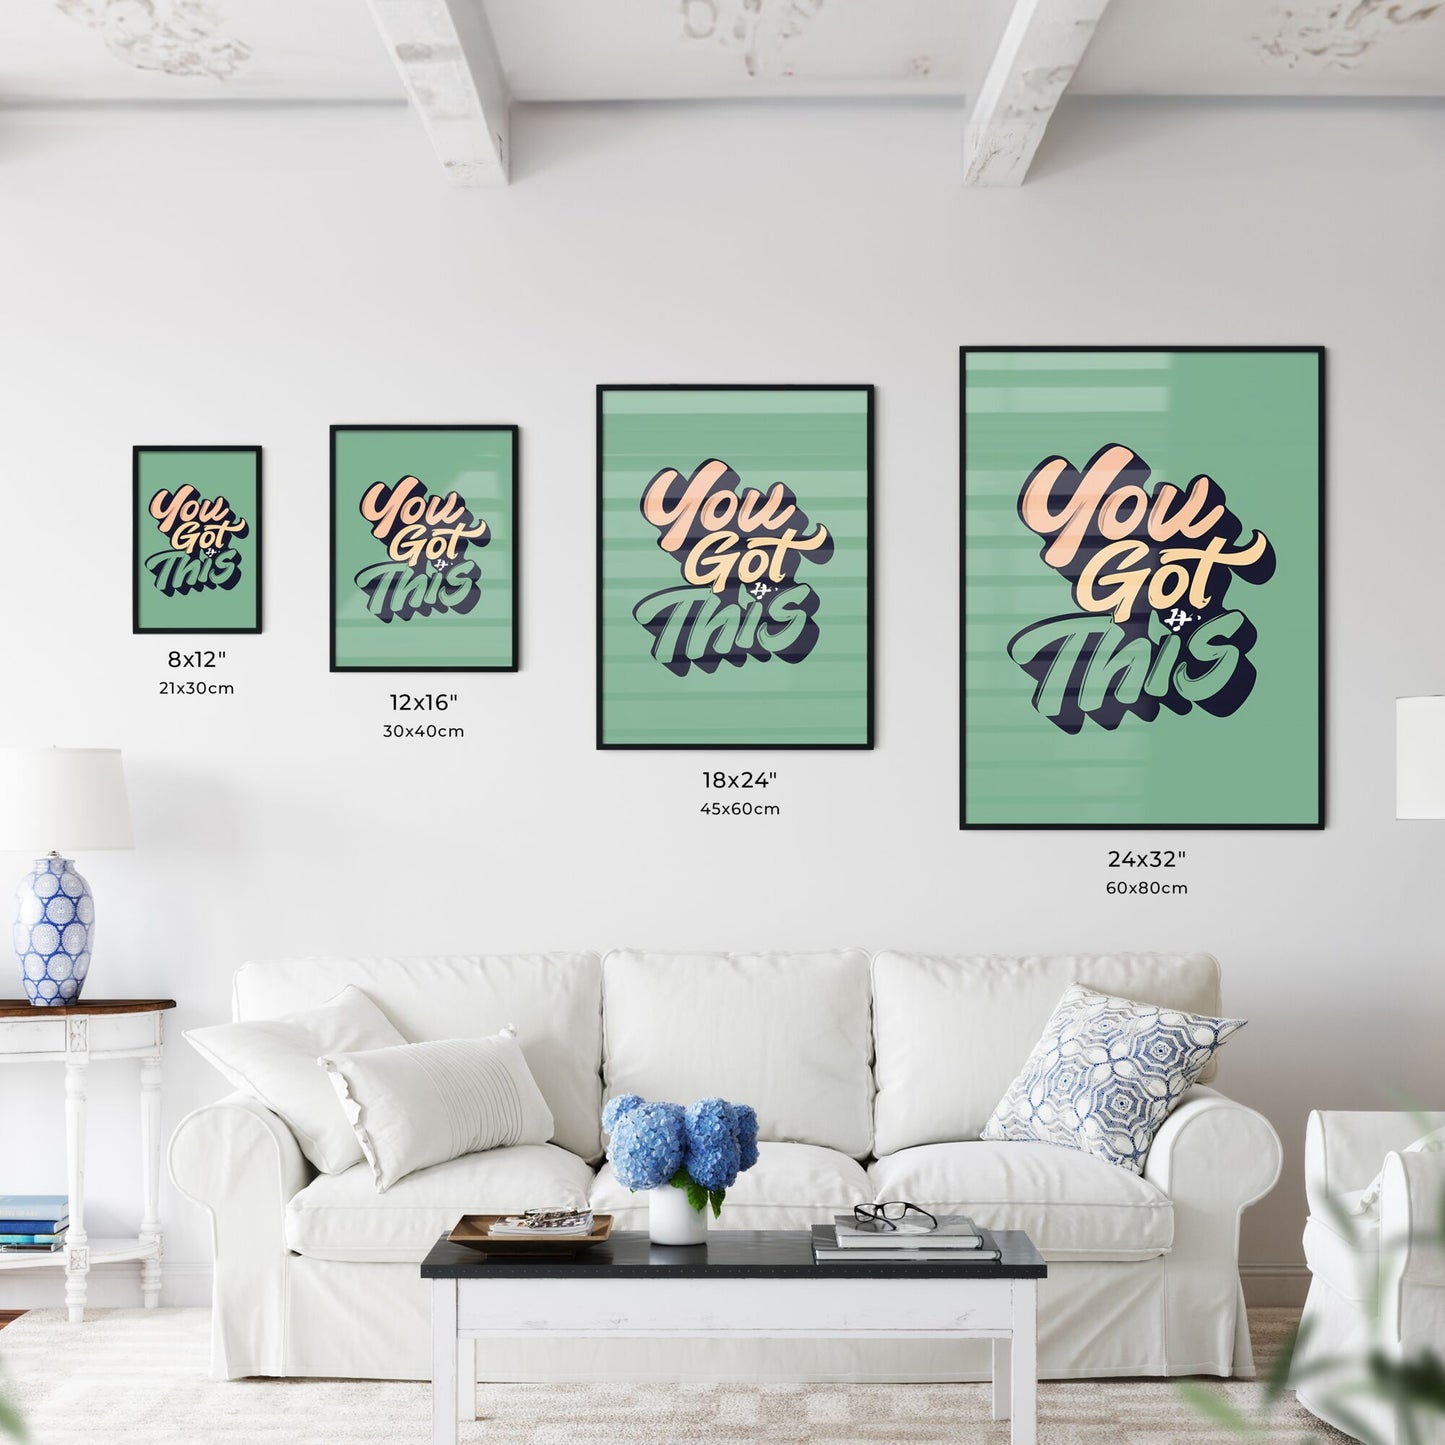 You Got This - A Green Background With Words Art Print Default Title